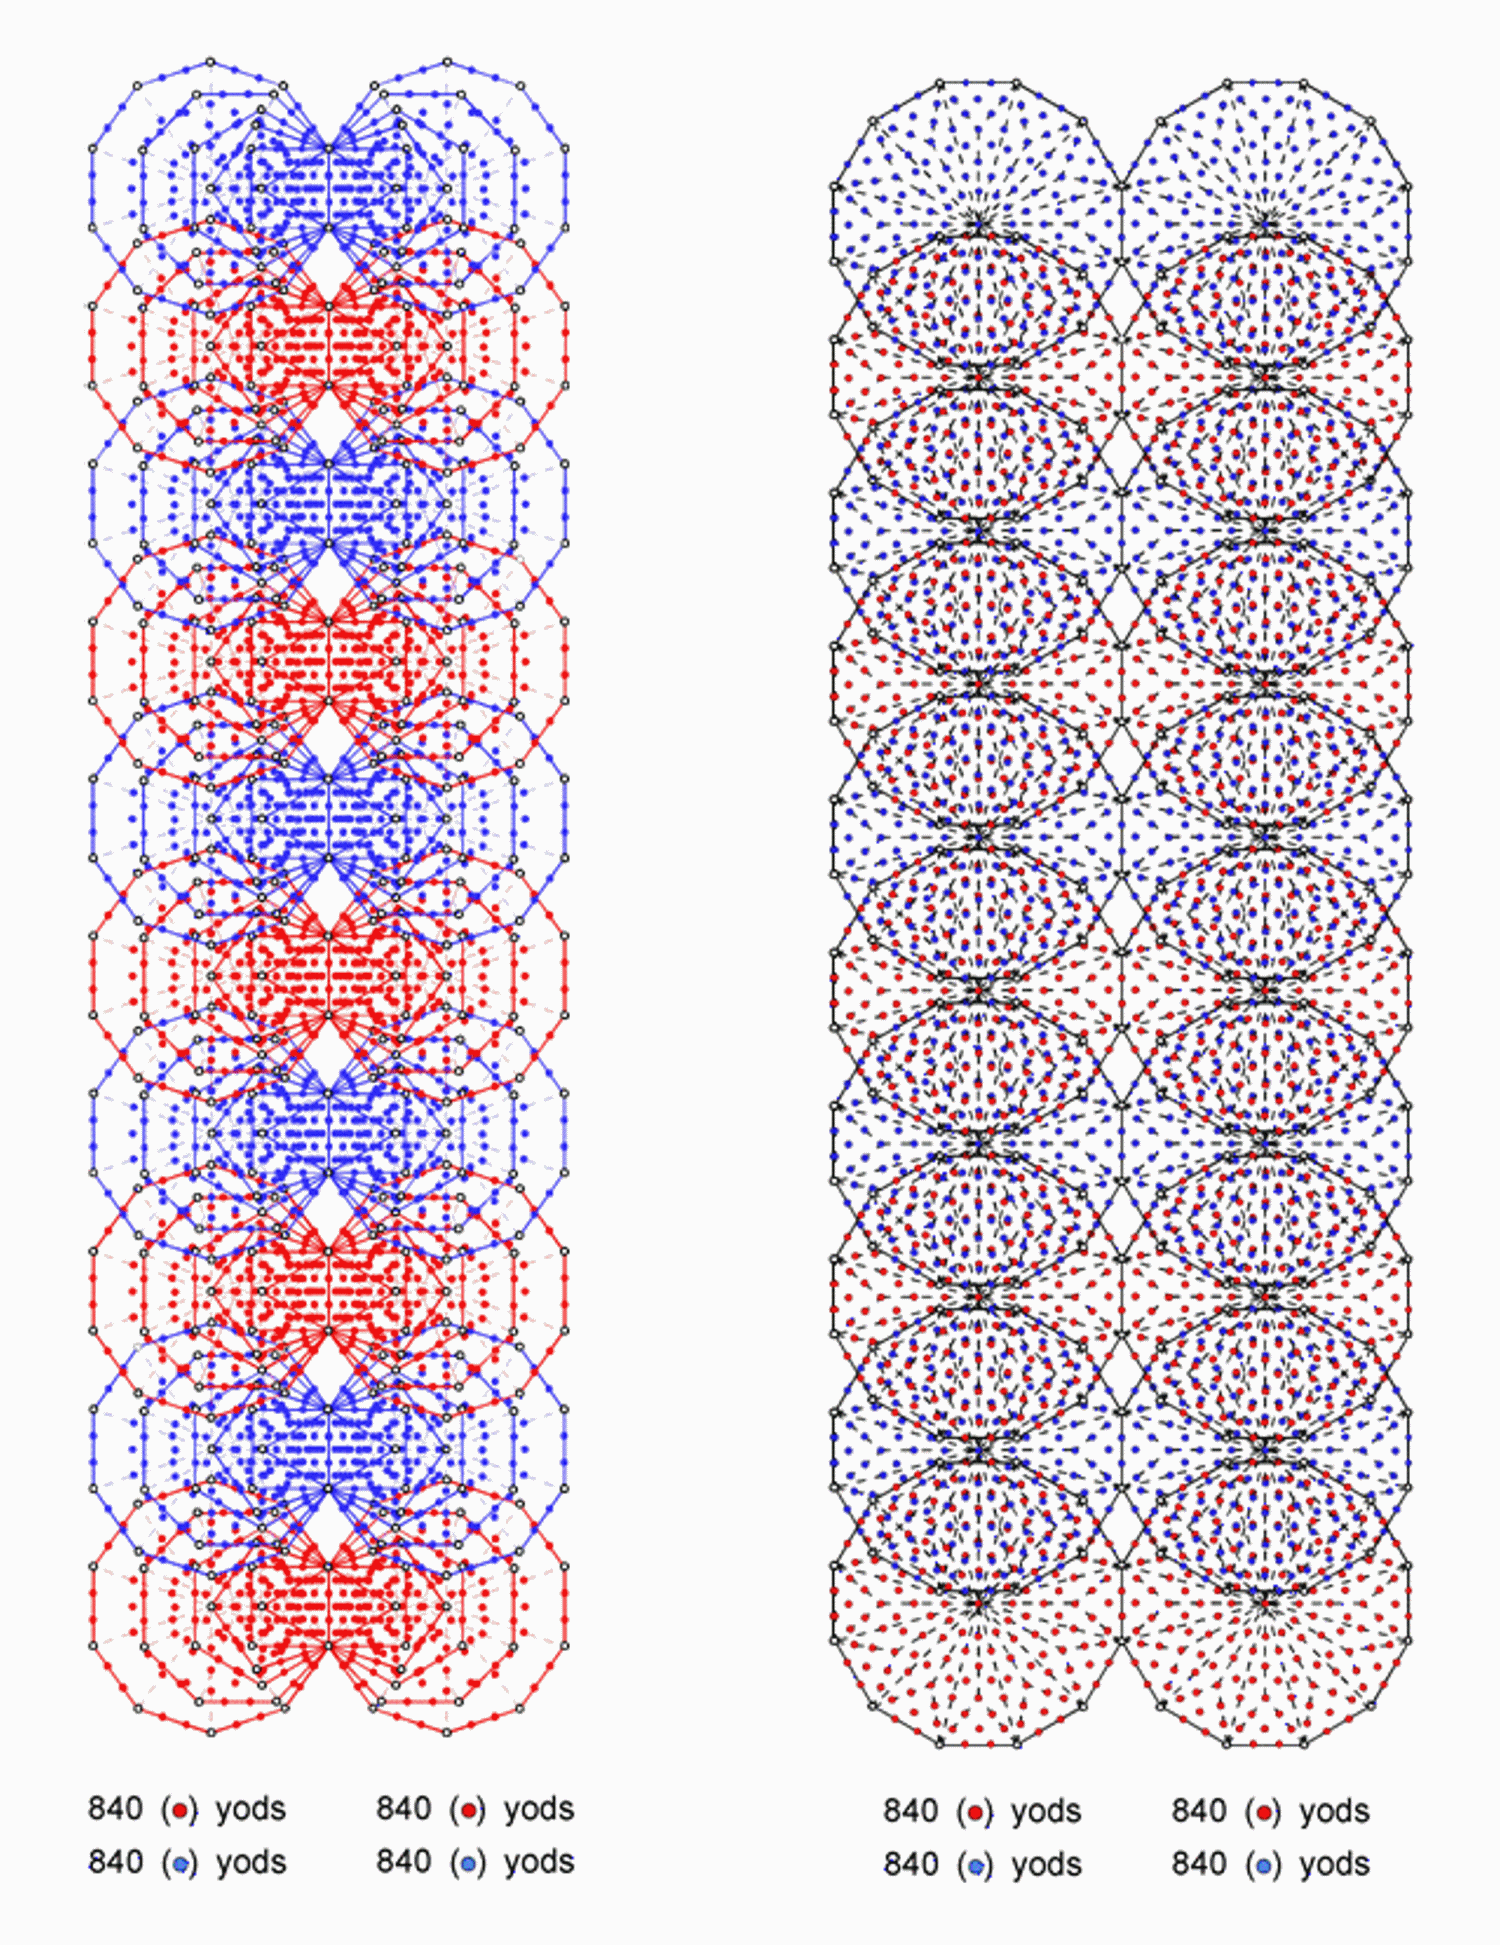 (1680+1680) yods in 1st 6 polygons and in dodecagons in 10-tree